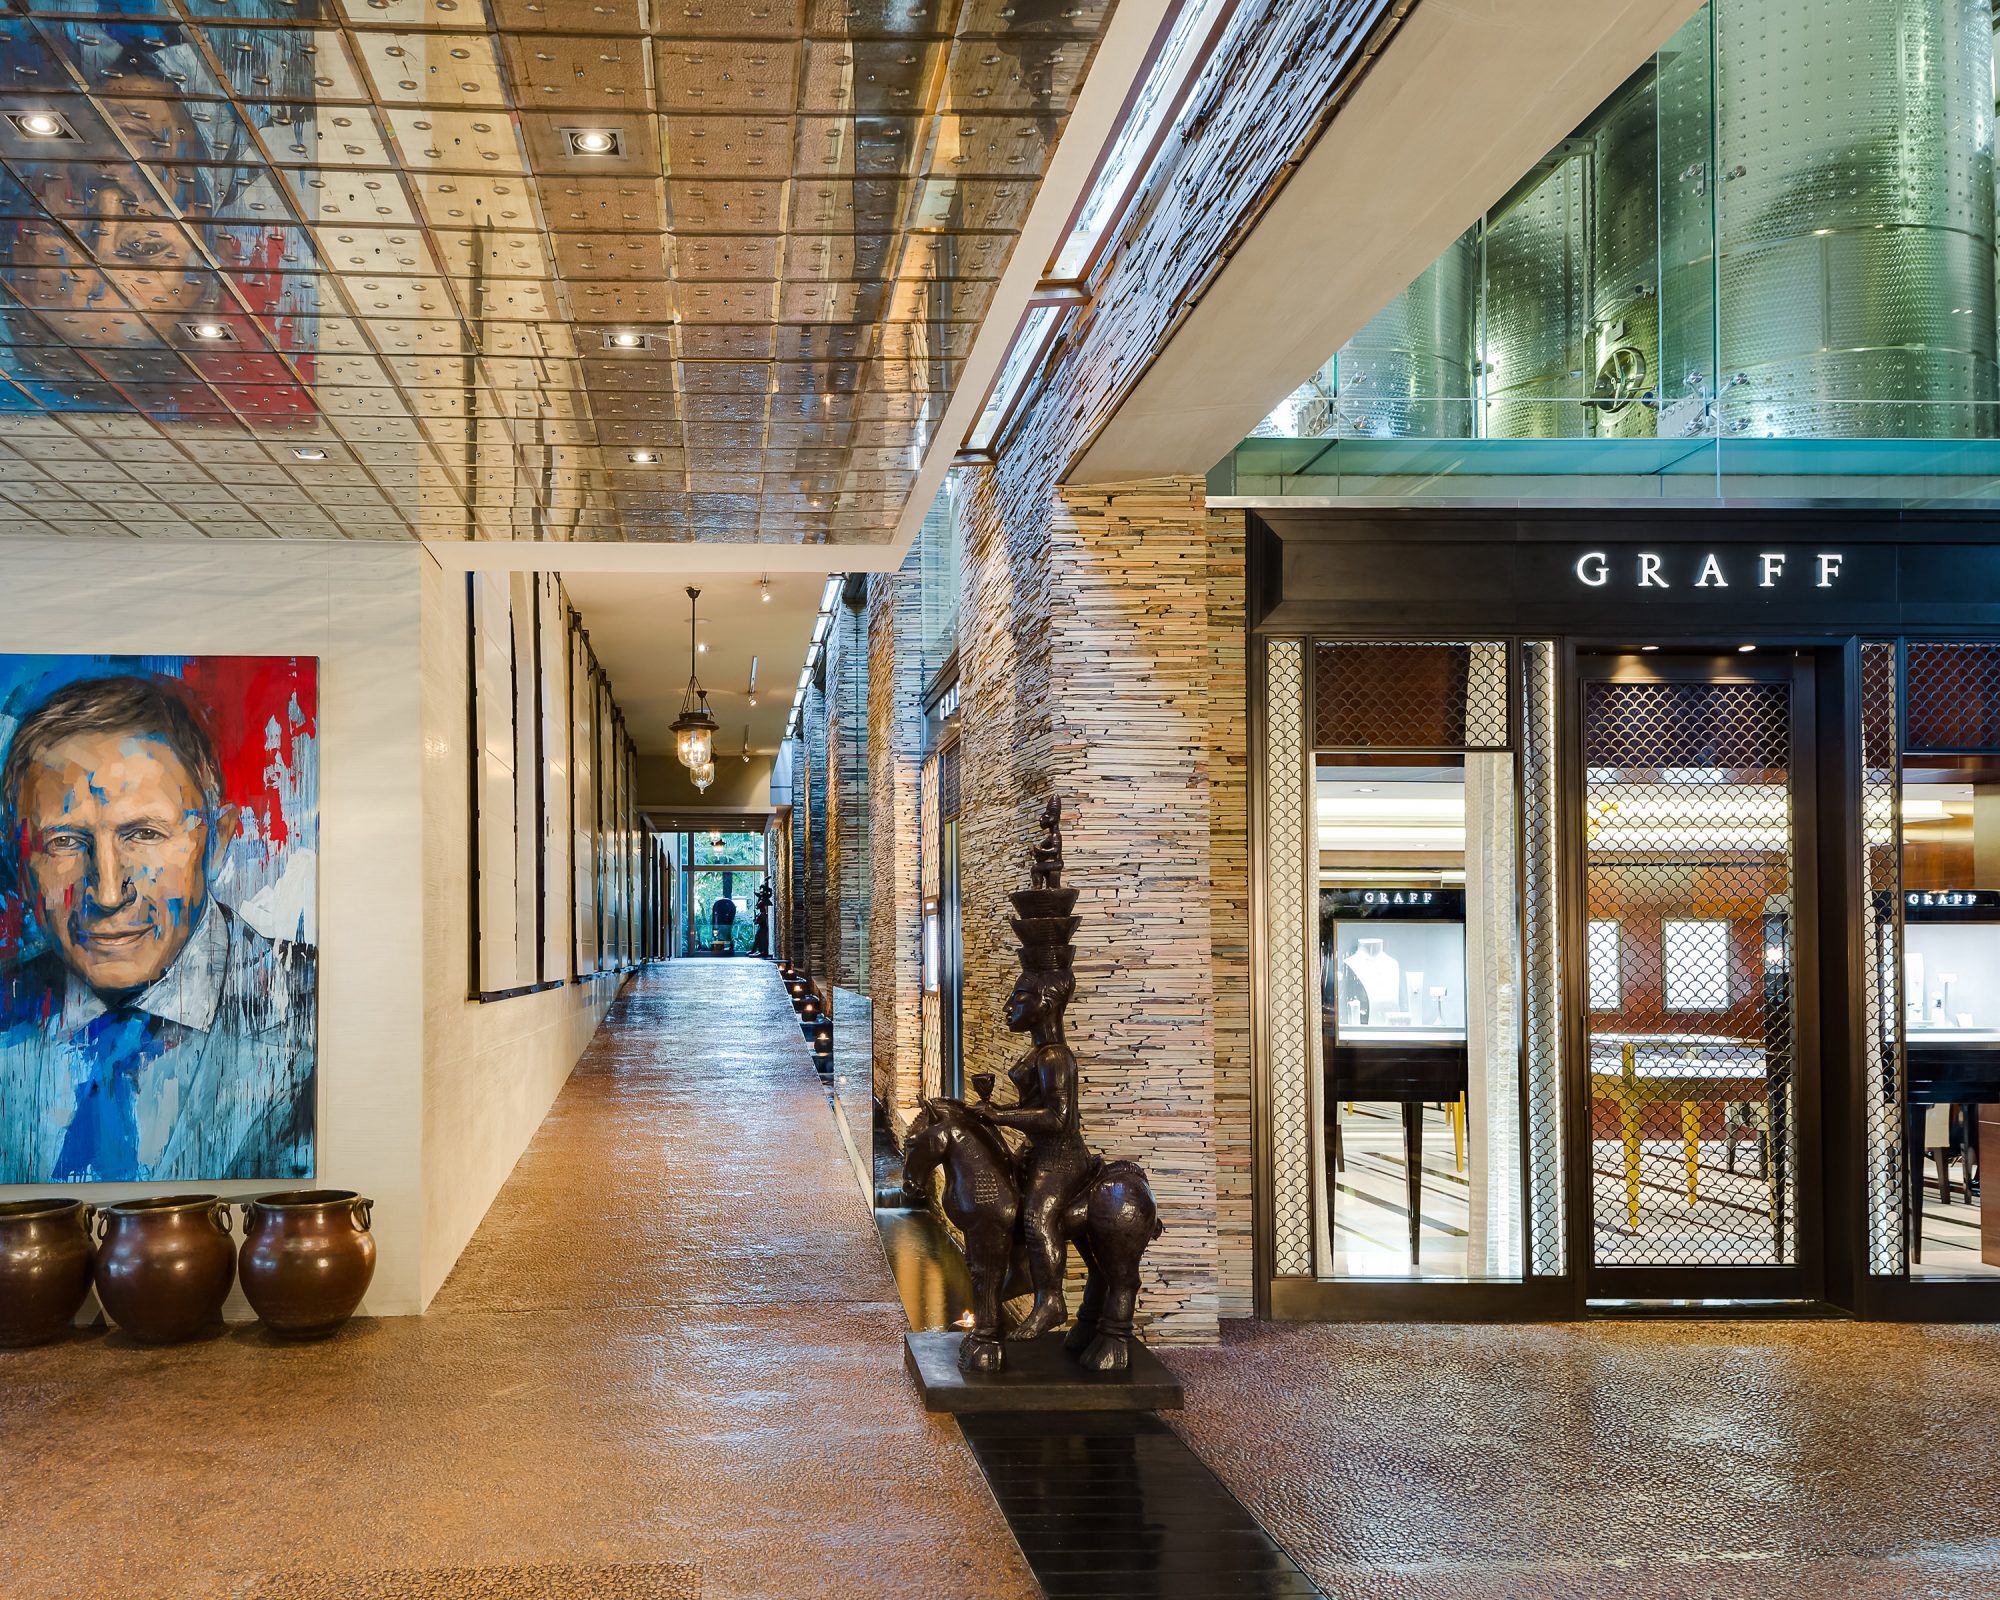 Exterior of the Graff jewellery boutique in the Delaire Graff Estate in South Africa